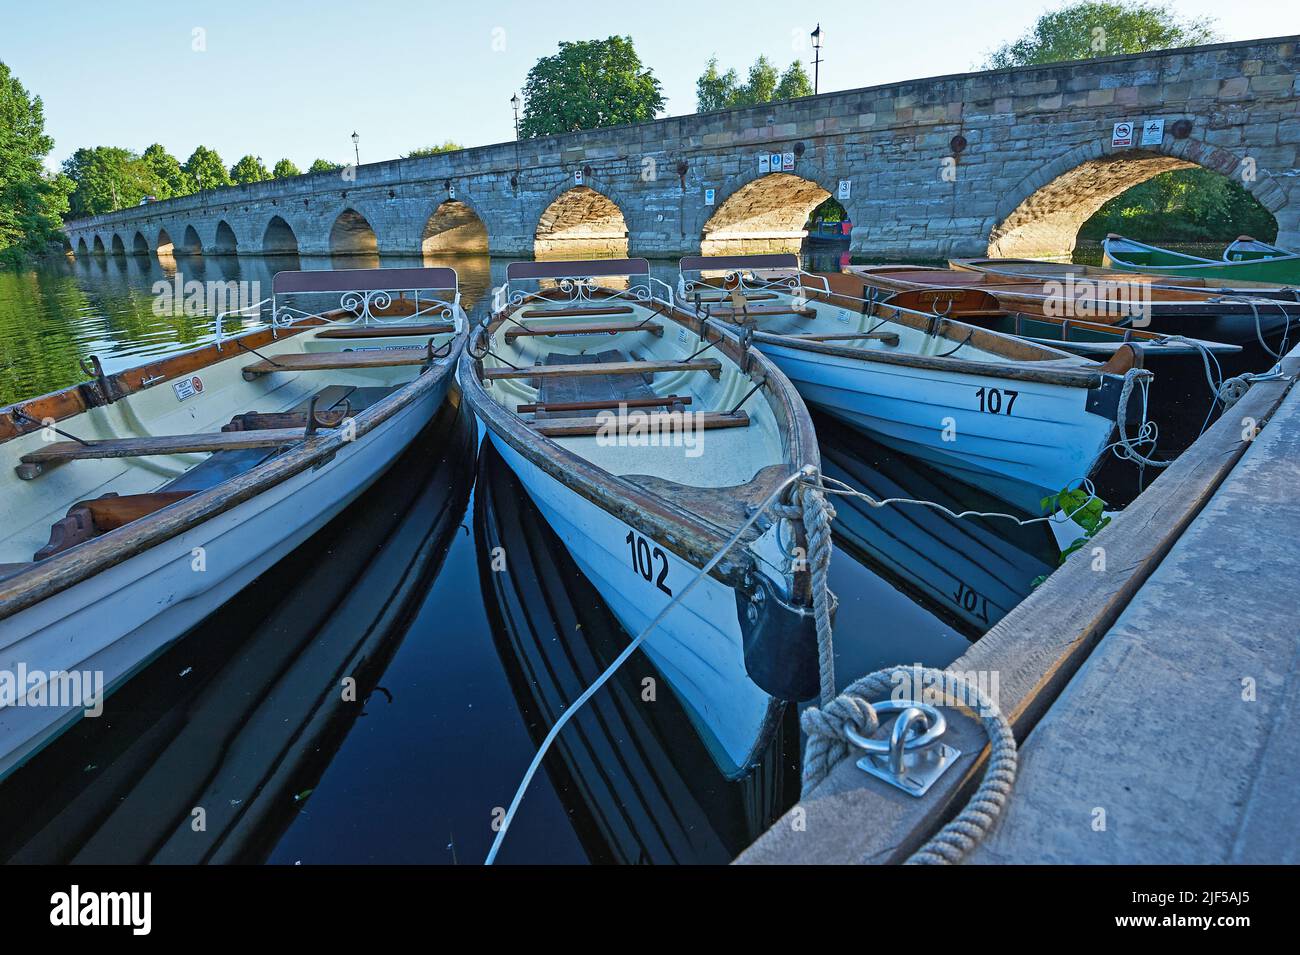 Day hire rowing boats moored on the River Avon at Stratford upon Avon, with Clopton Bridge in the background. Stock Photo